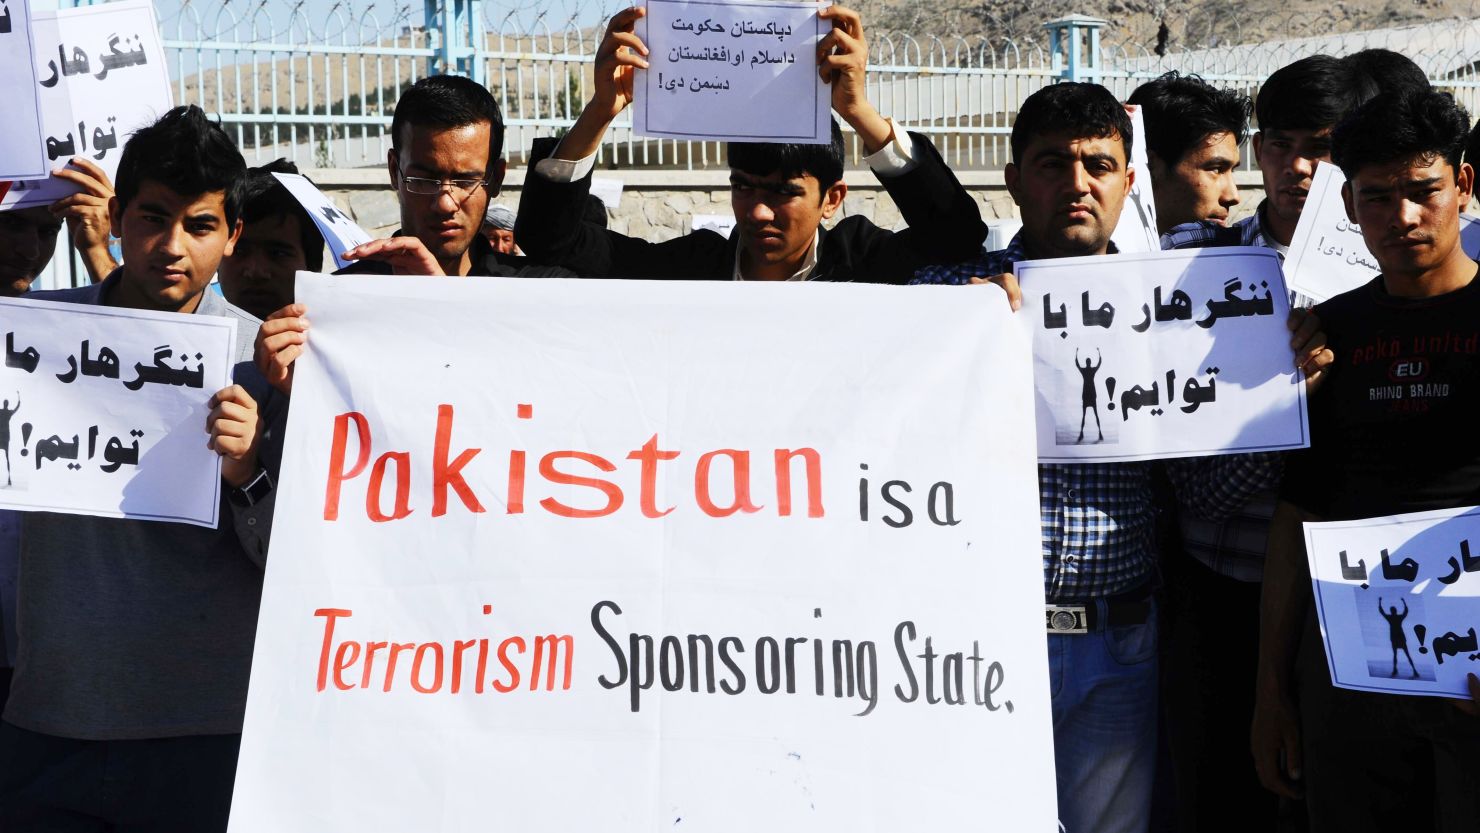 Afghan protesters during a demonstration against Pakistan in Herat, May 8, 2013.